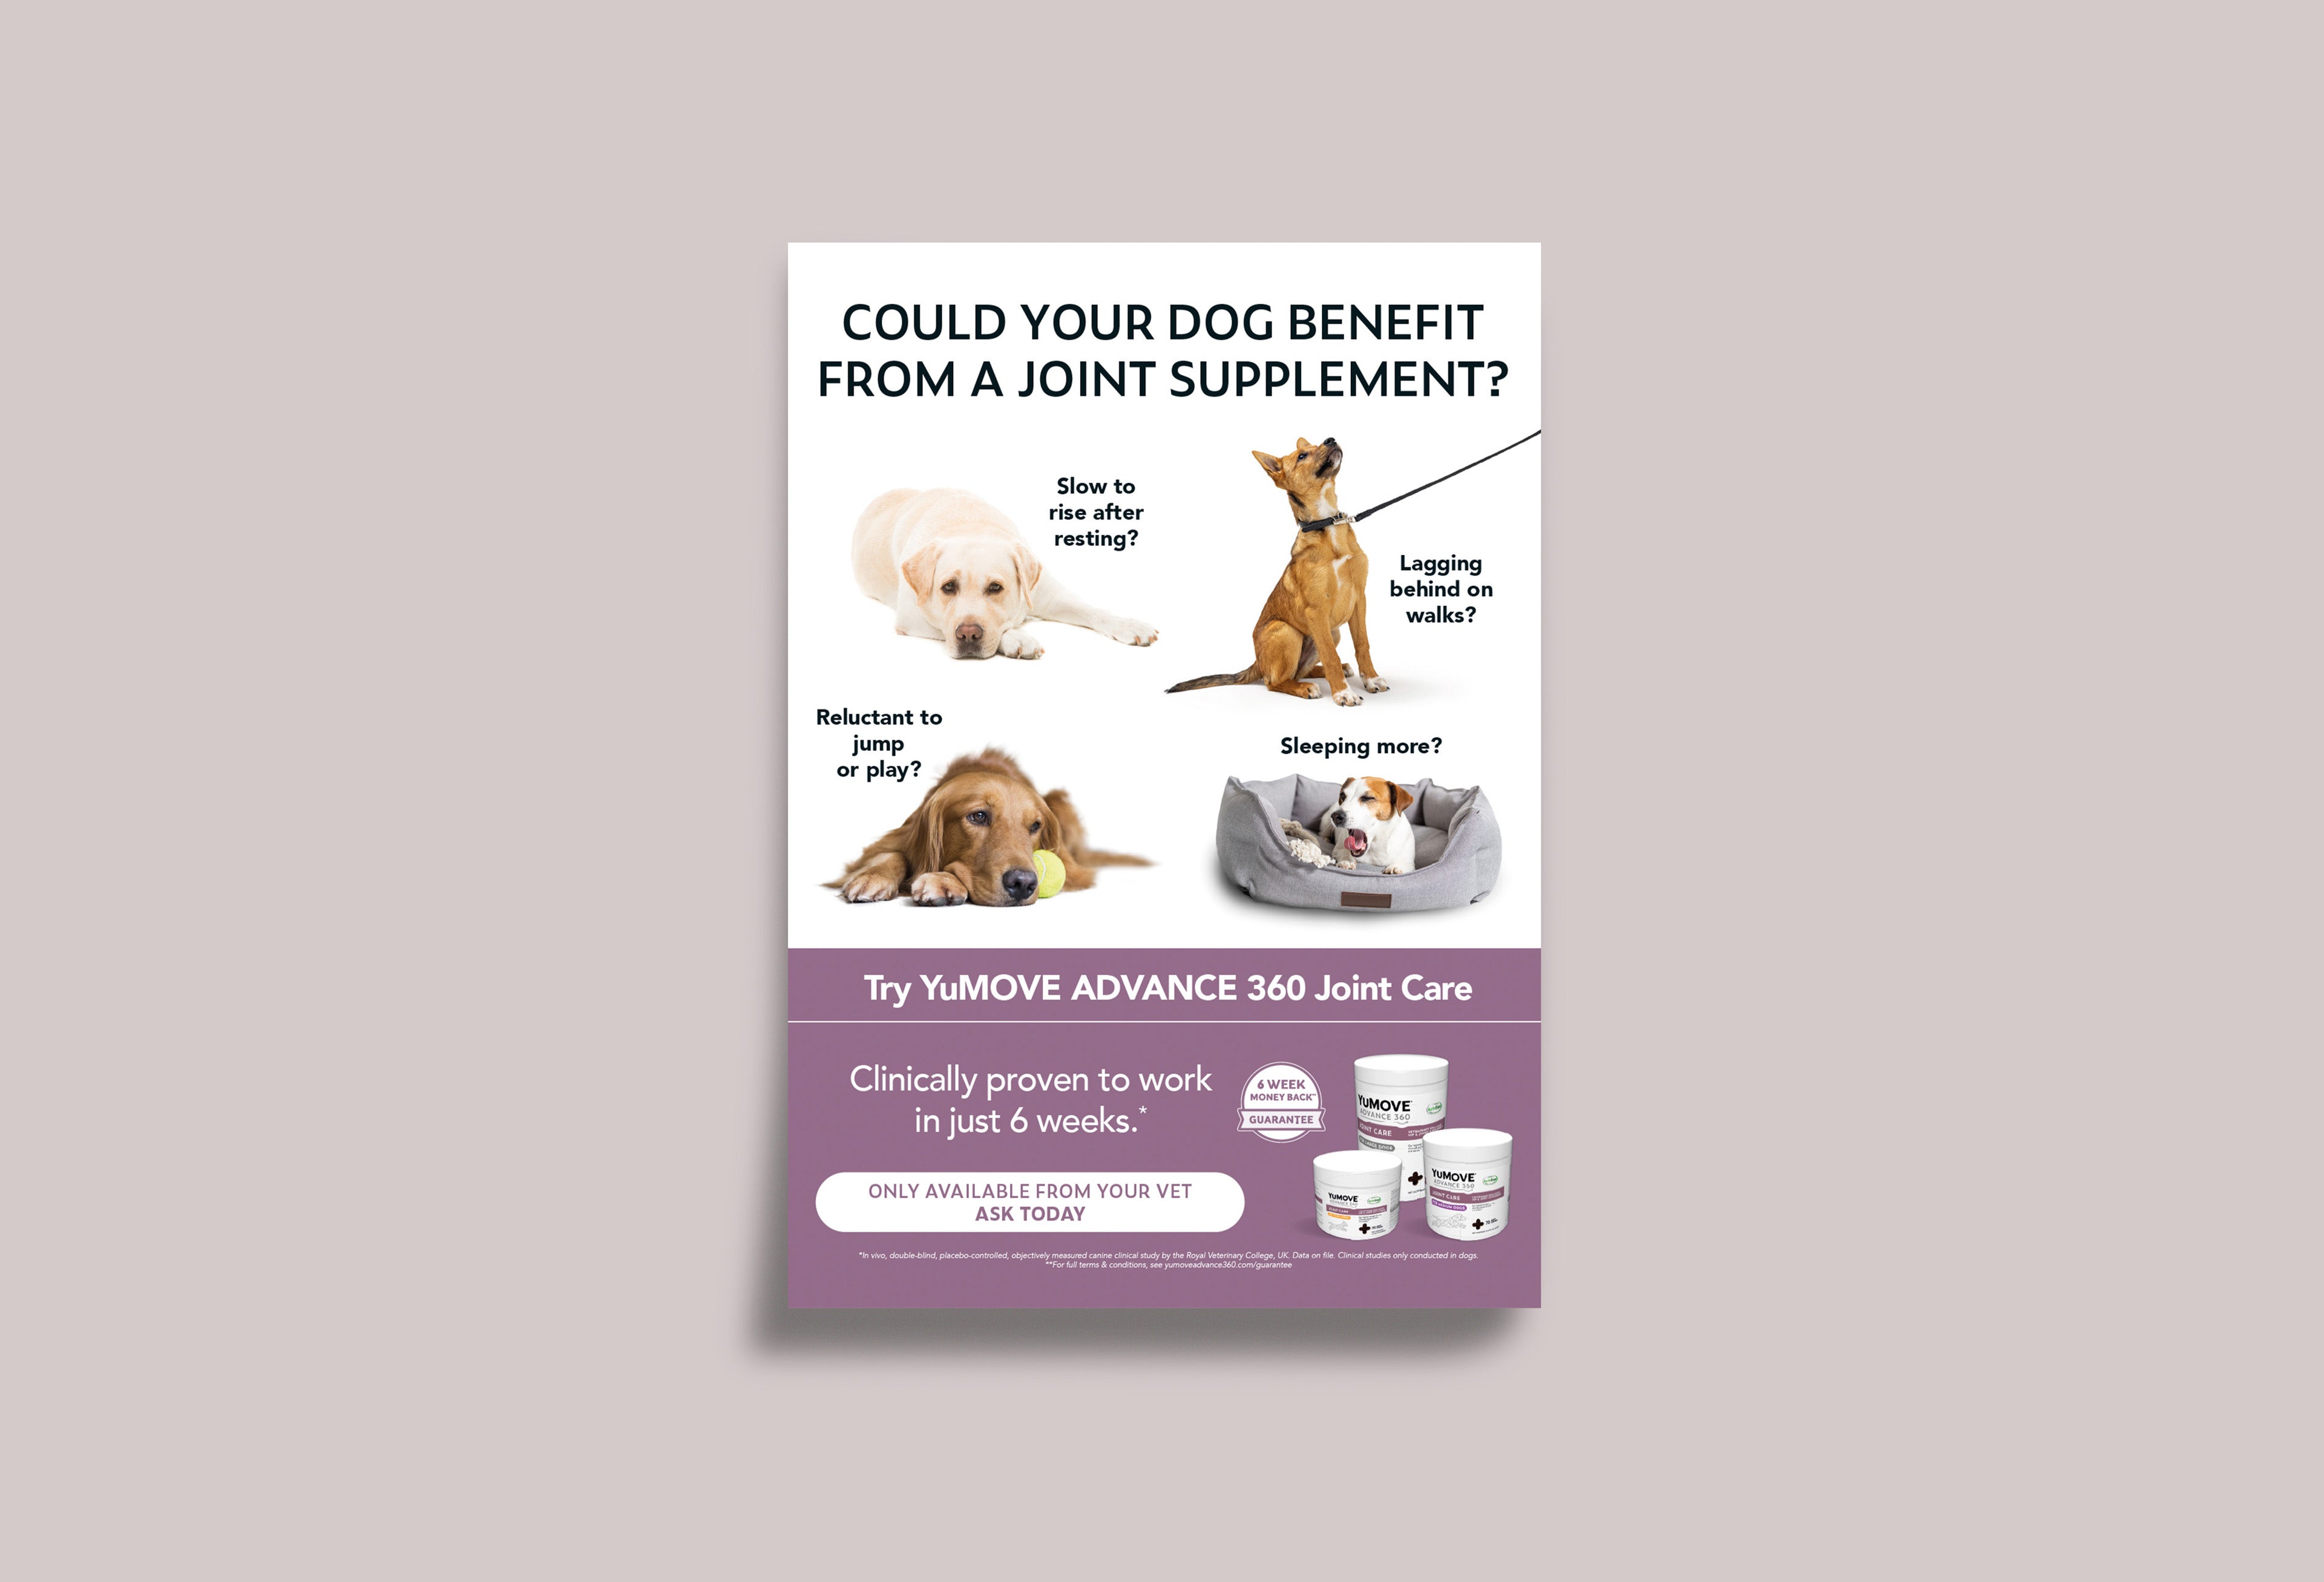 The image is a promotional poster for YuMOVE ADVANCE 360 Joint Care, asking if a dog could benefit from a joint supplement. It features questions related to a dog's mobility and activity, images of dogs exhibiting those behaviors, and a call to action to try the product, claiming it's clinically proven to work in just 6 weeks.* See Additional Information page for more information.